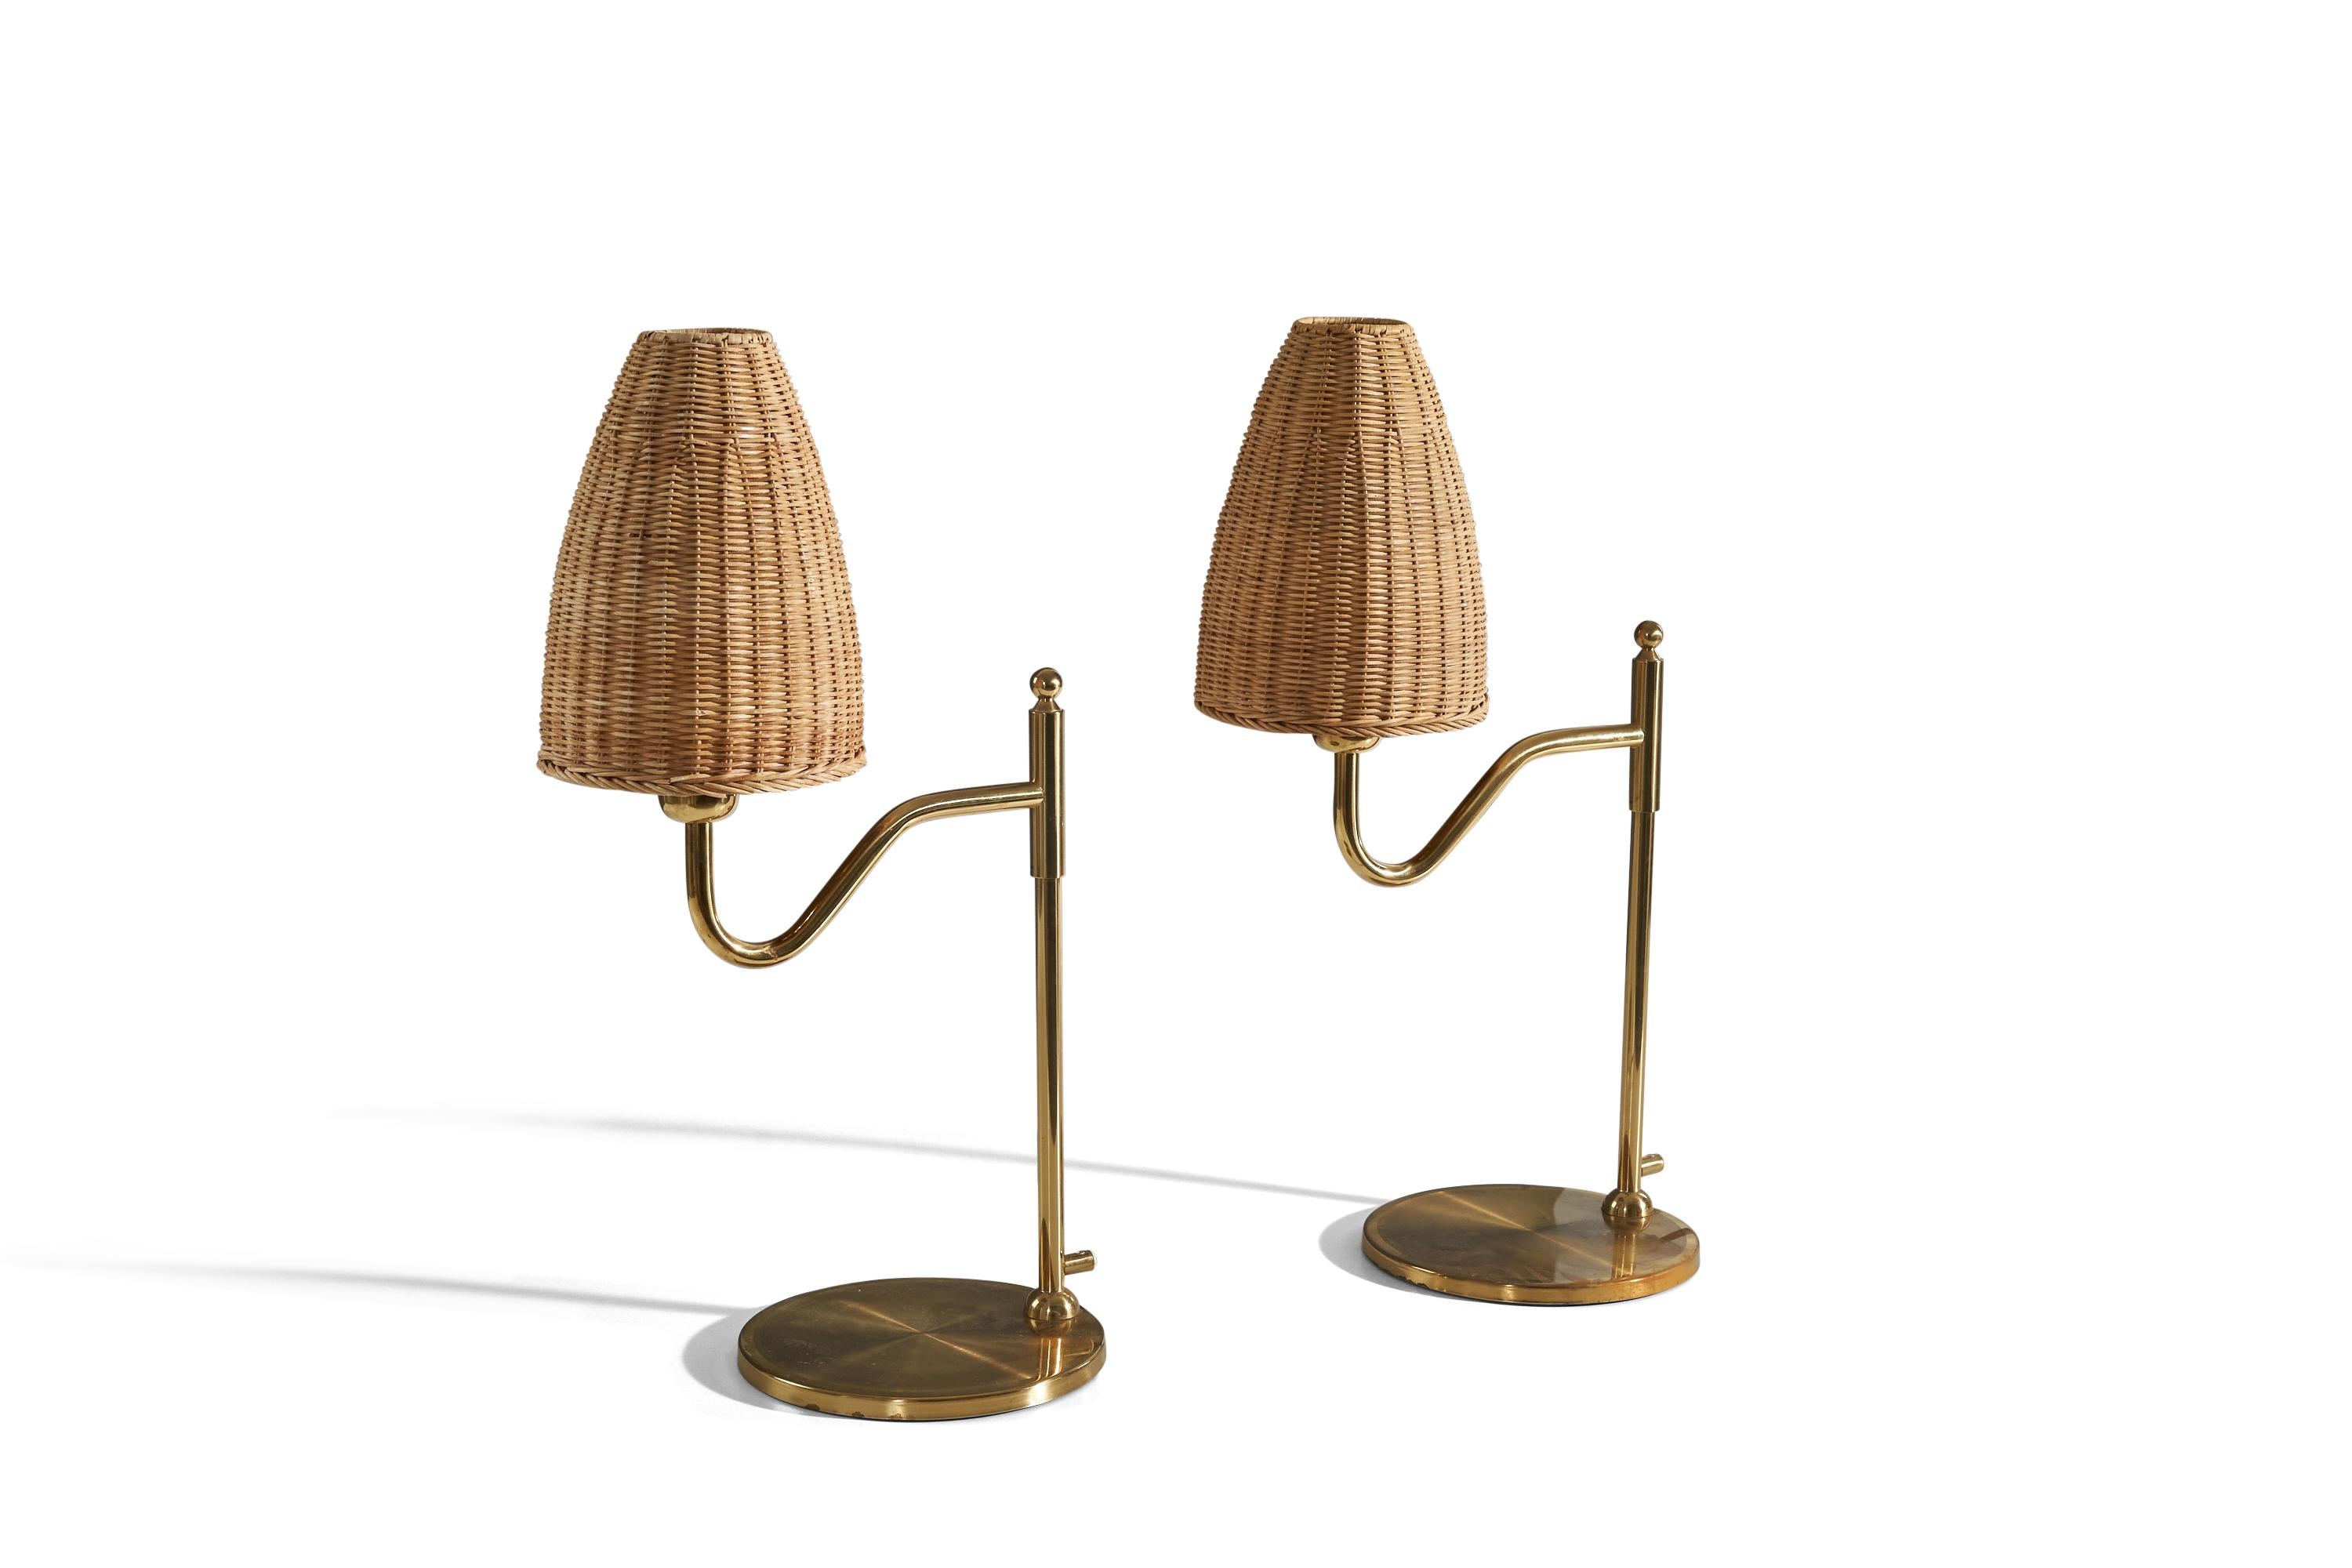 A pair of brass and rattan table lamps designed and produced in Sweden, 1970s. 

Sold with lampshade. 
Dimensions of Lamp (inches) : 18 x 8.62 x 11.5 (H x W x D)
Dimensions of Shade (inches) : 2.43 x 7 x 9.87 (T x B x S)
Dimension of Lamp with